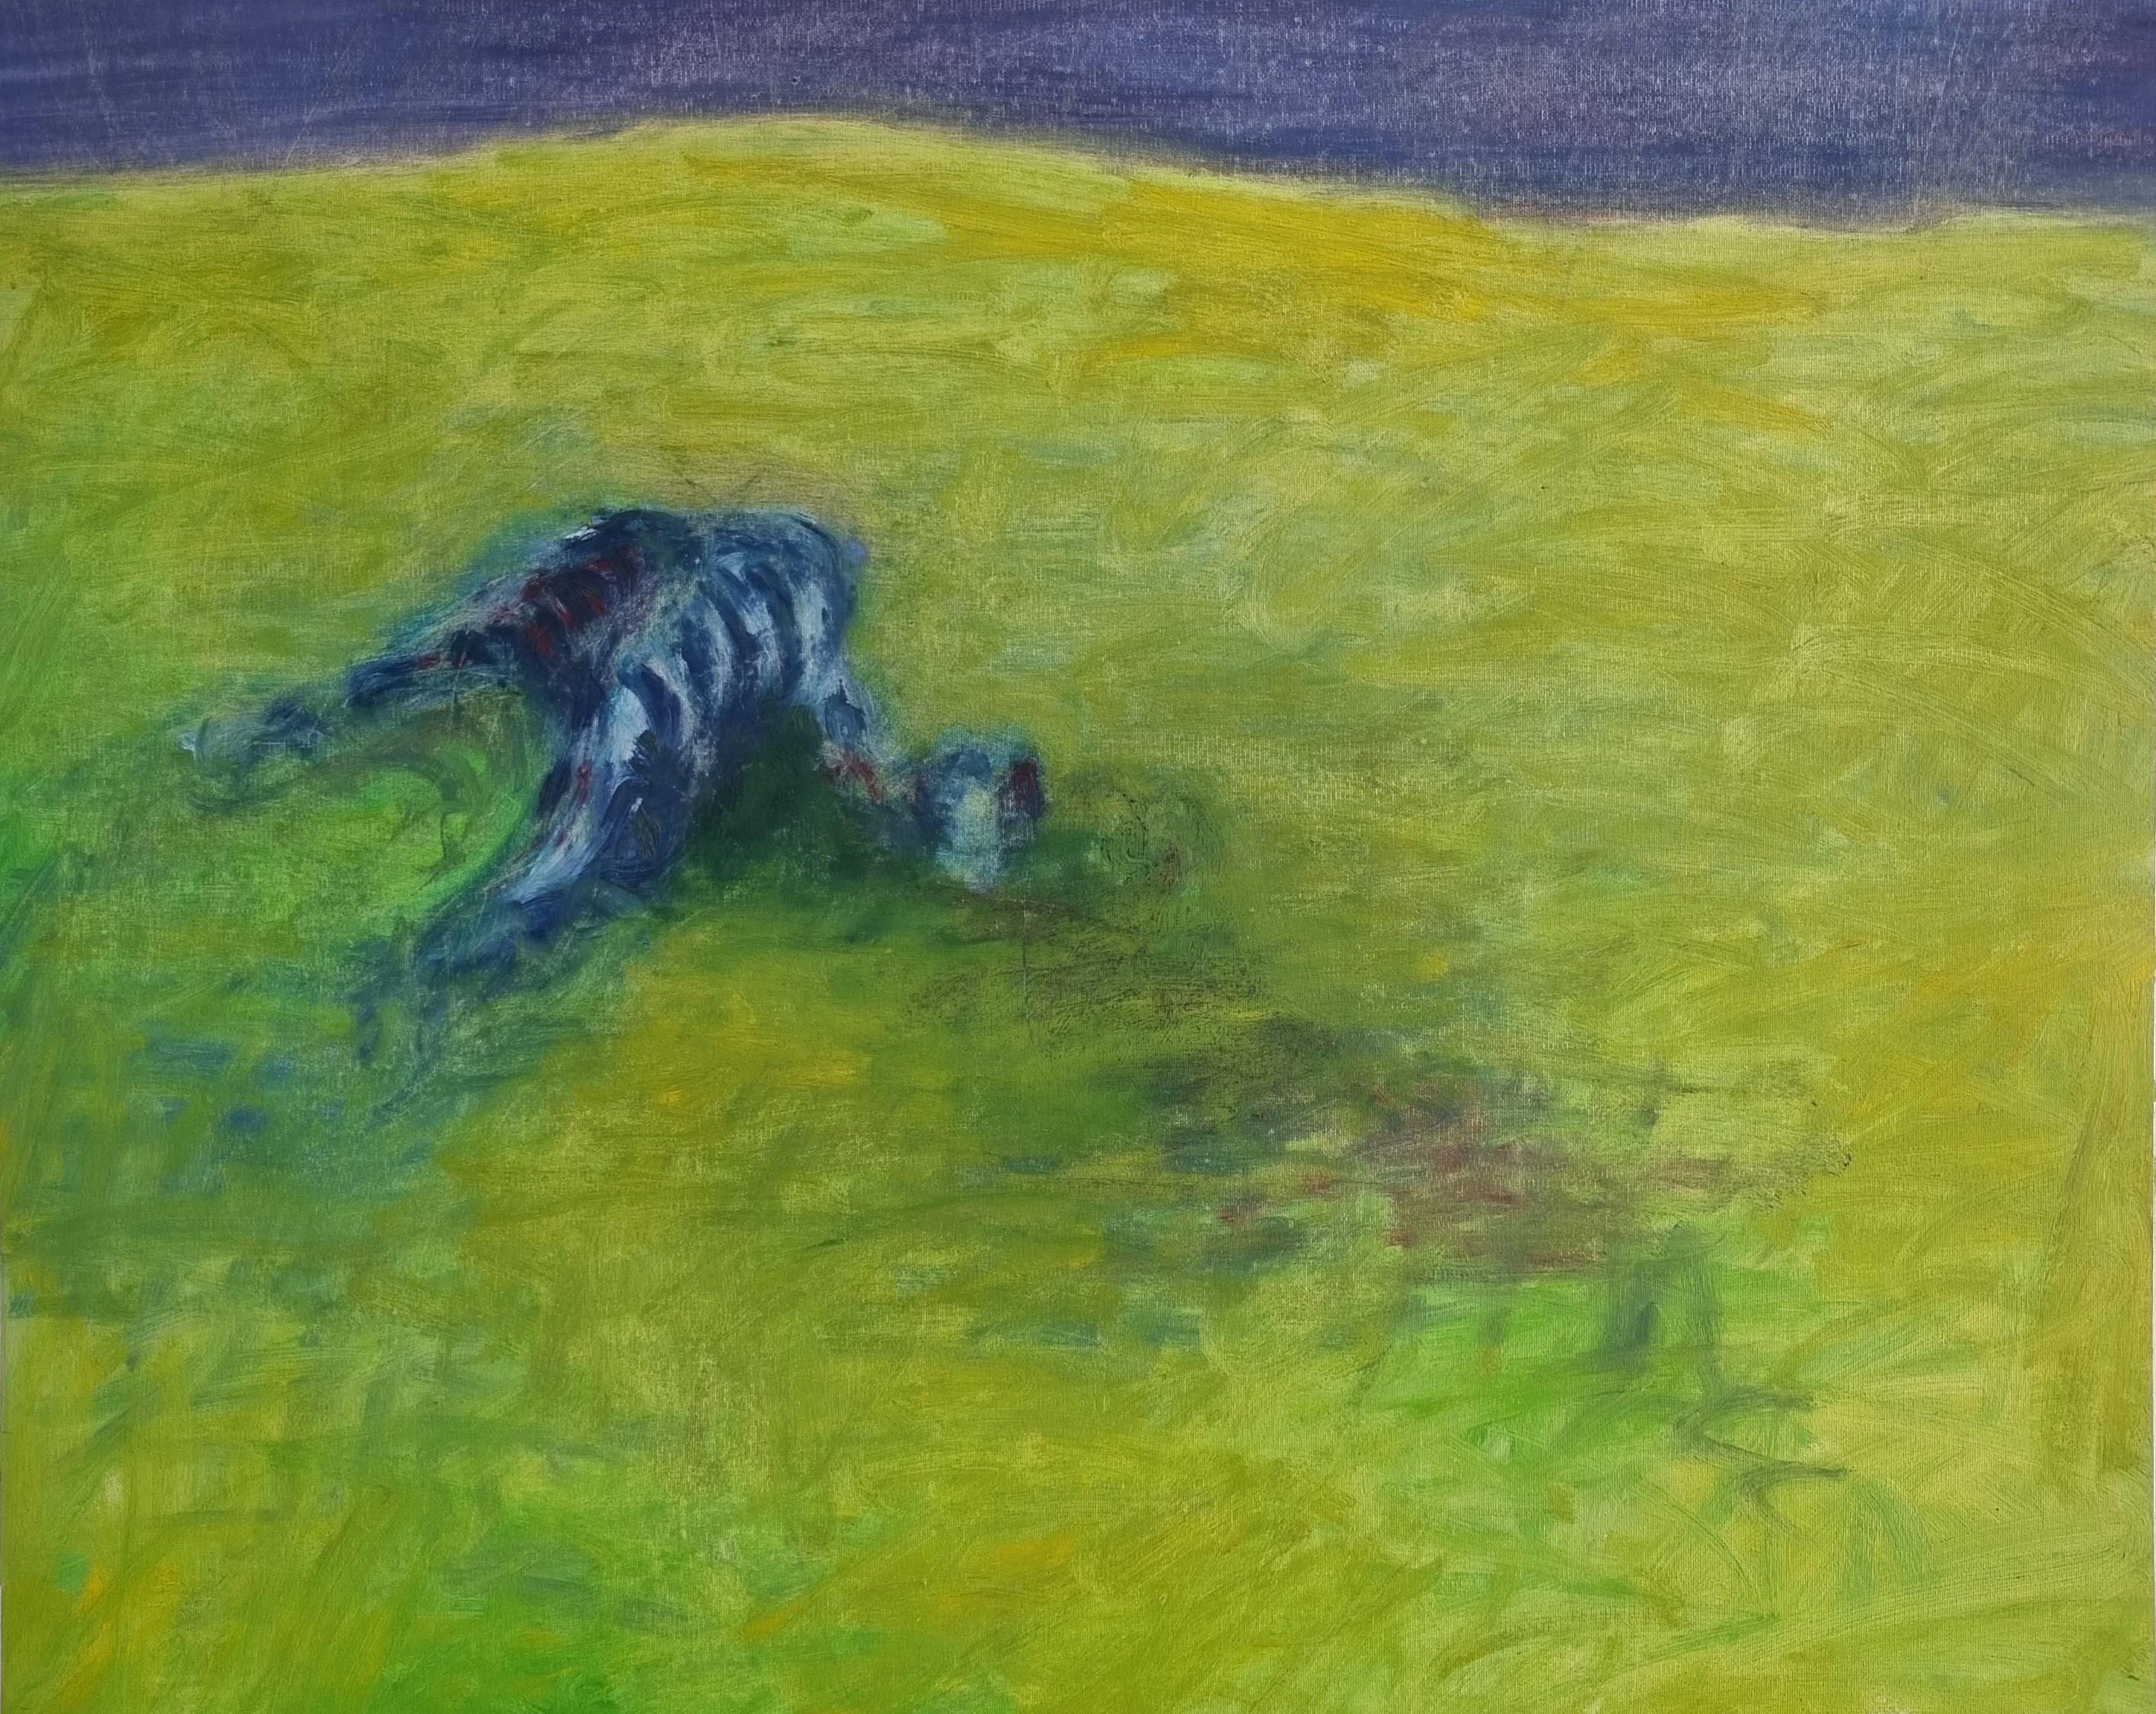 Body in the Field 1 - 21st Century, Landscape, Green, Blue, Painting For Sale 3